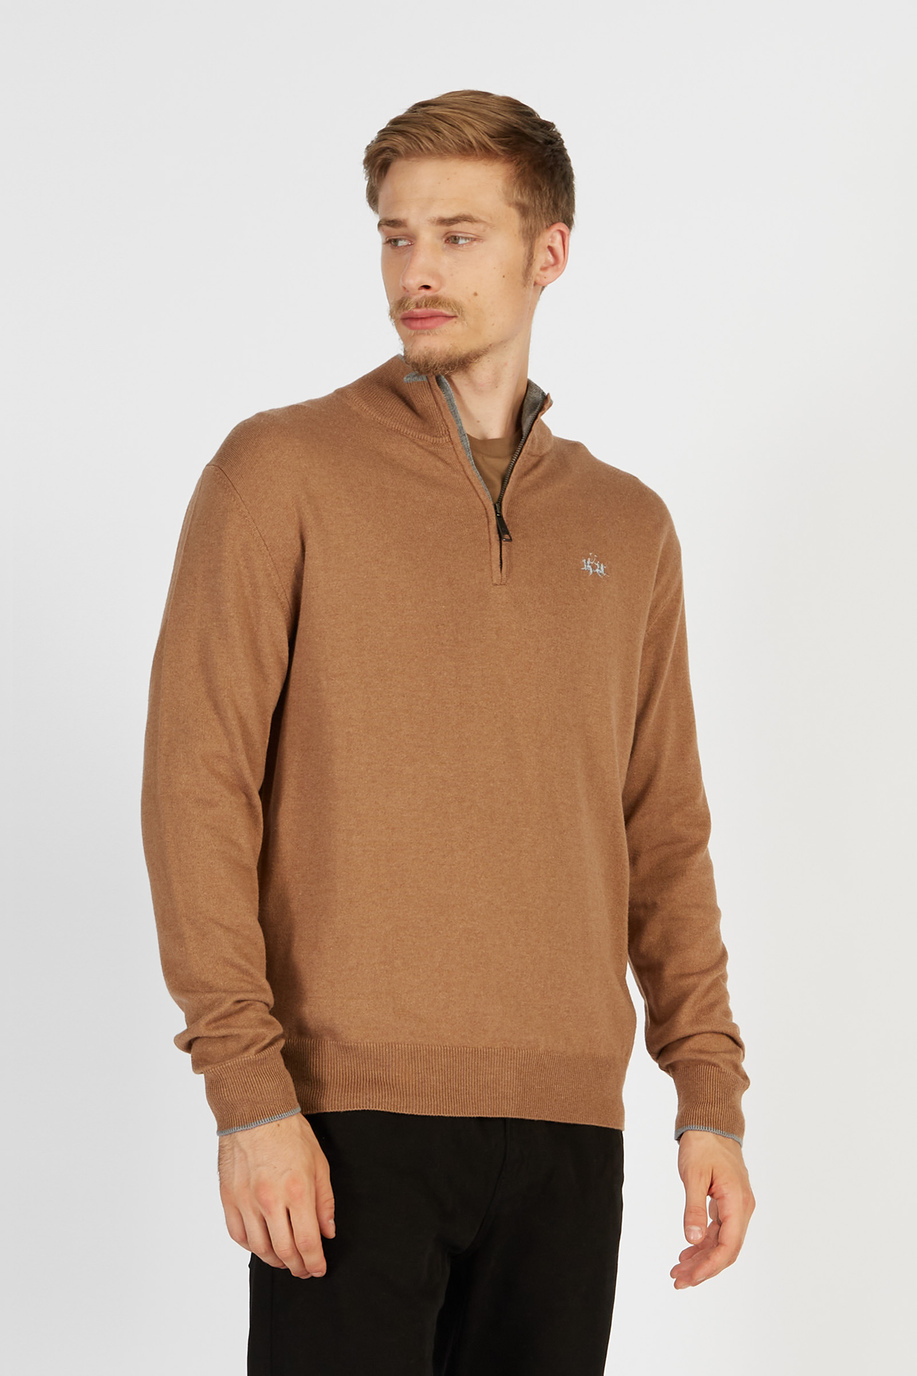 Men’s knitted sweater with long sleeves in cotton and regular fit wool blend with zip neckline - Winter looks for him | La Martina - Official Online Shop